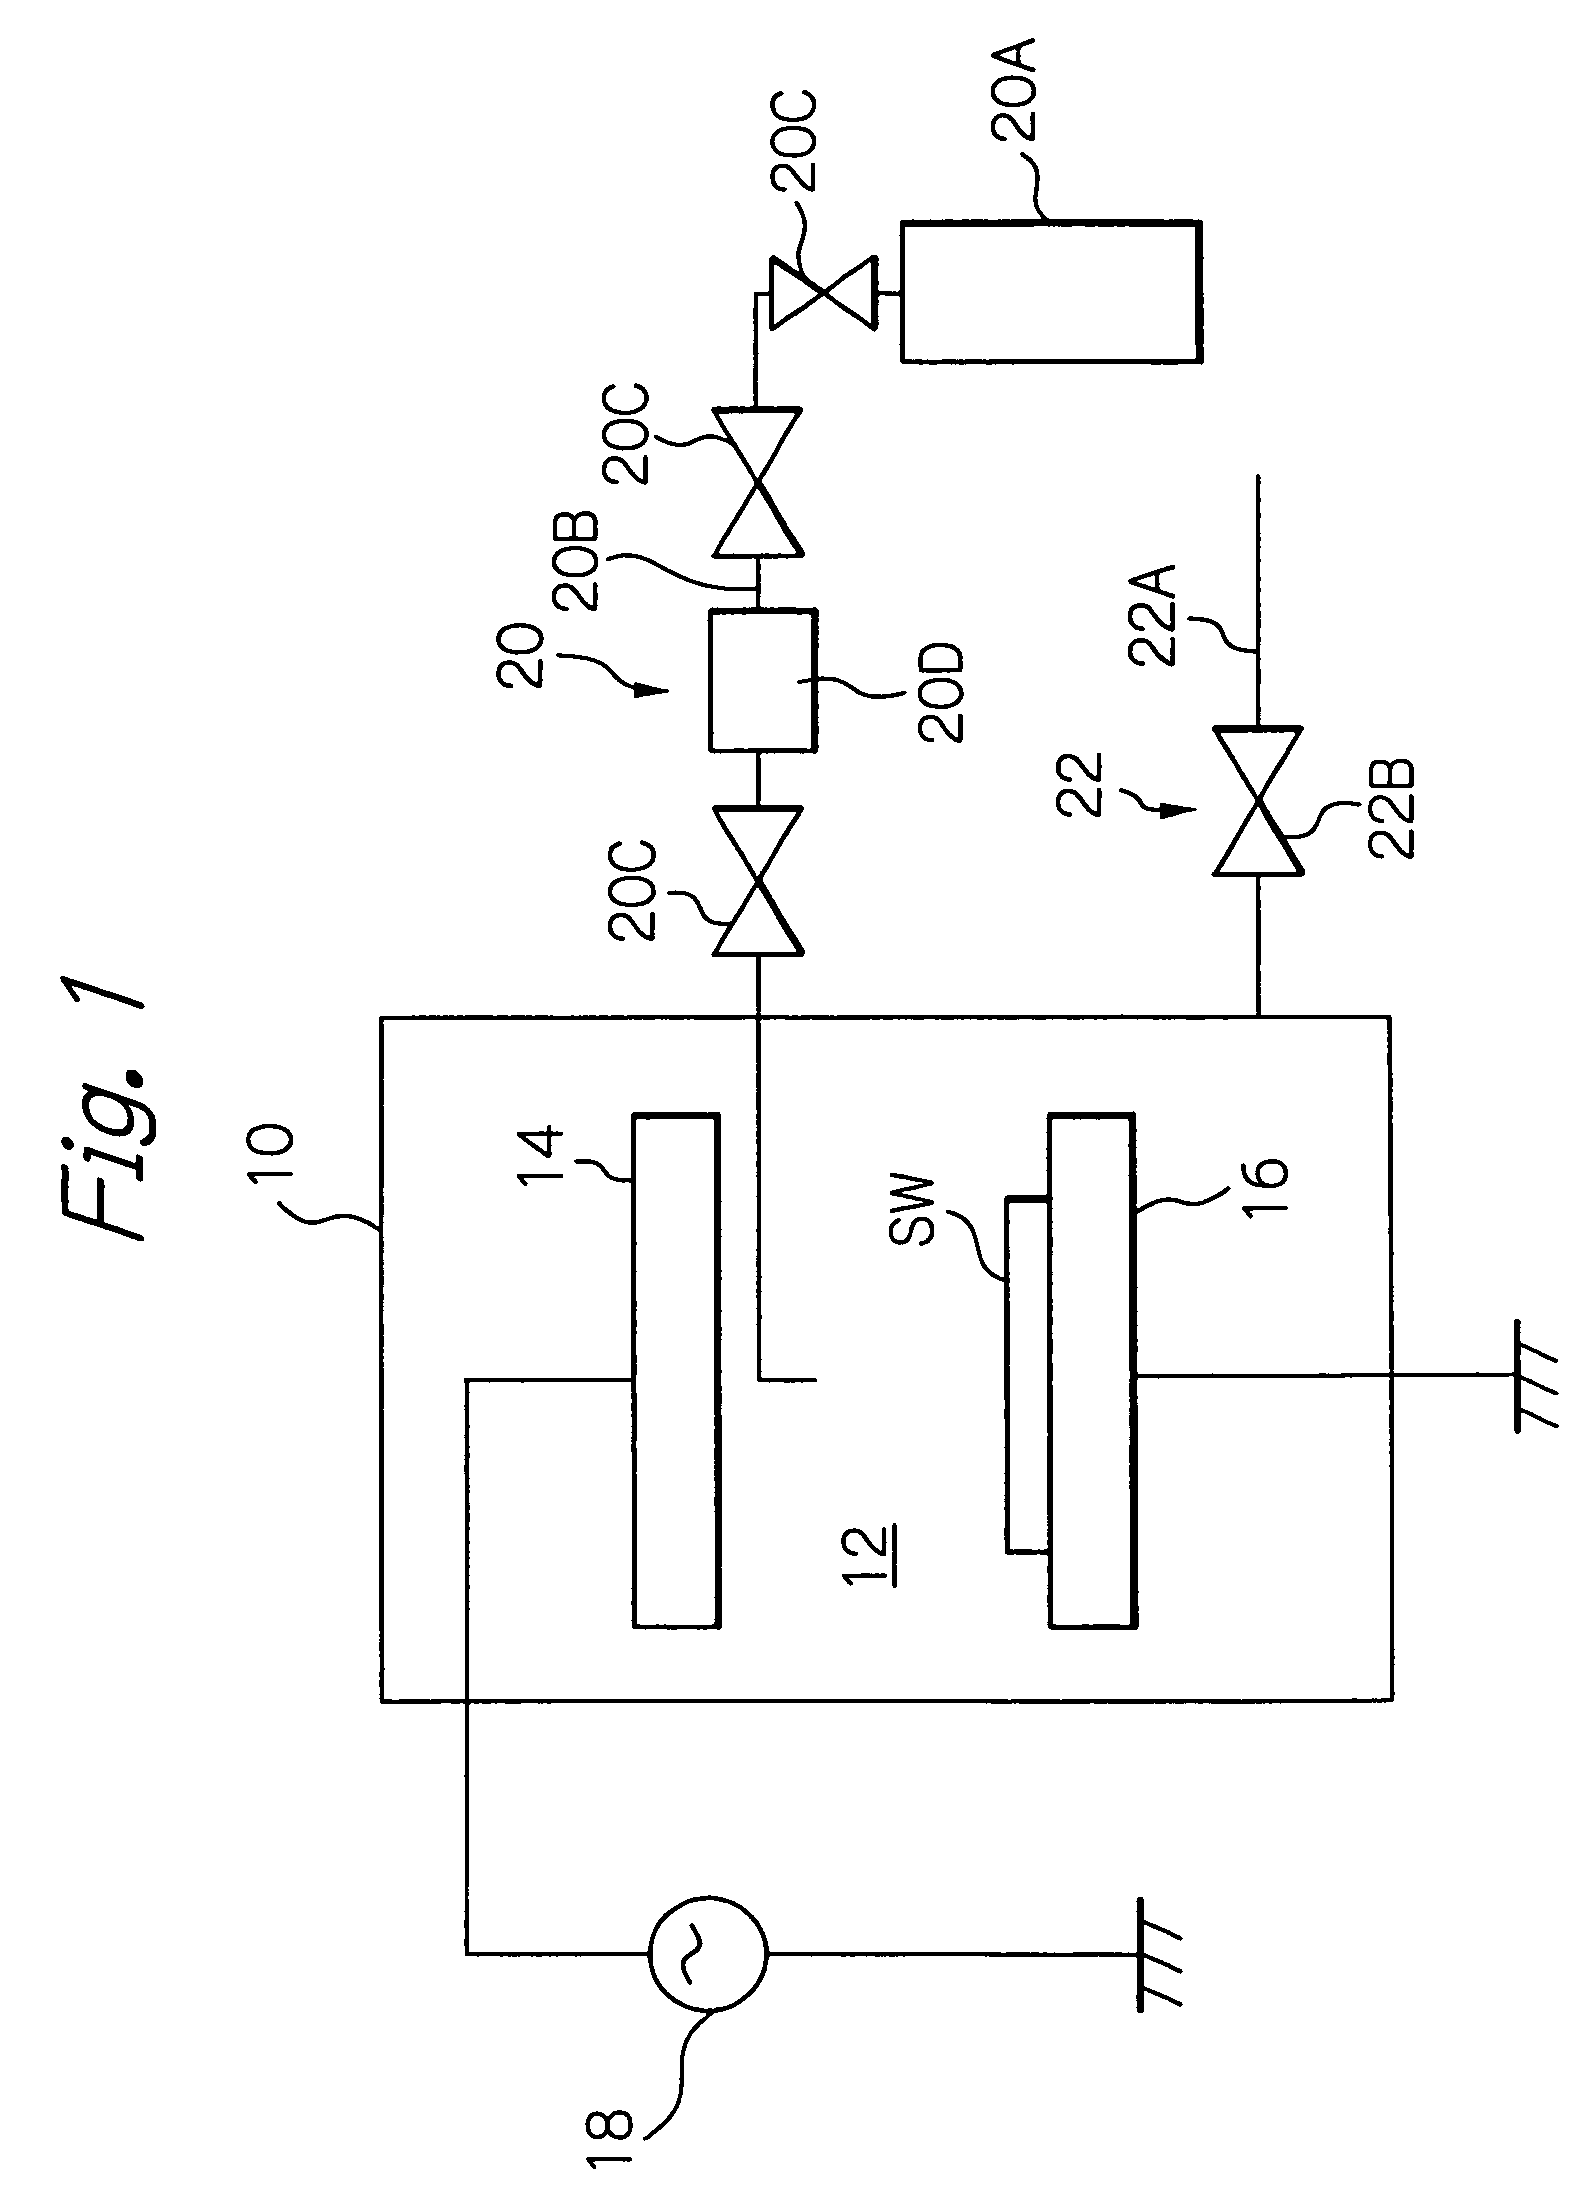 Semiconductor device having two distinct sioch layers